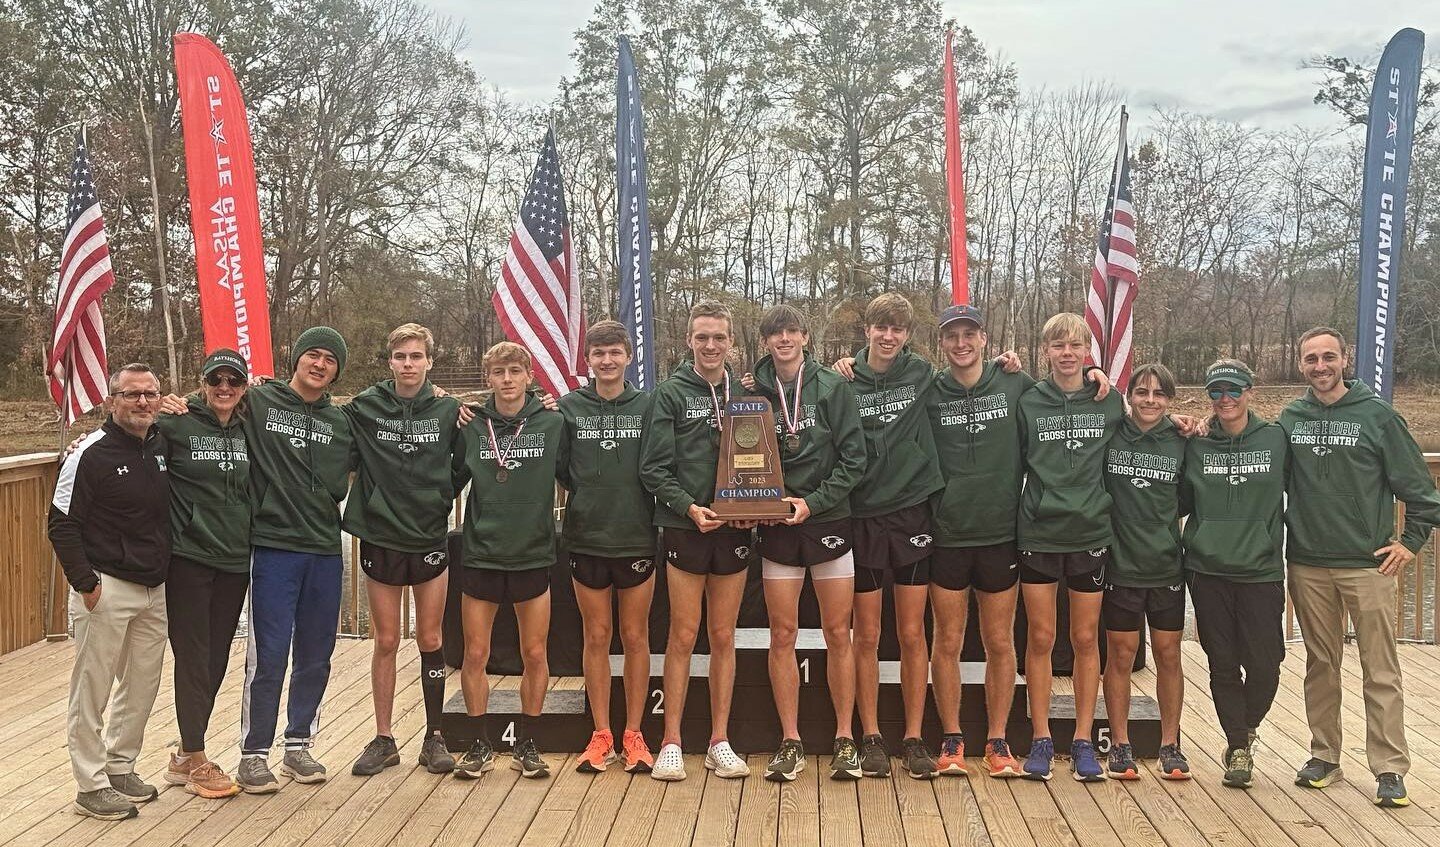 The Bayshore Christian Eagles had all seven point-scorers record top-30 finishes at the AHSAA’s Class 3A State Championship meet in Moulton on Saturday, Nov. 11. Junior Caden Phillippi crossed the finish line first to claim an individual title as well.